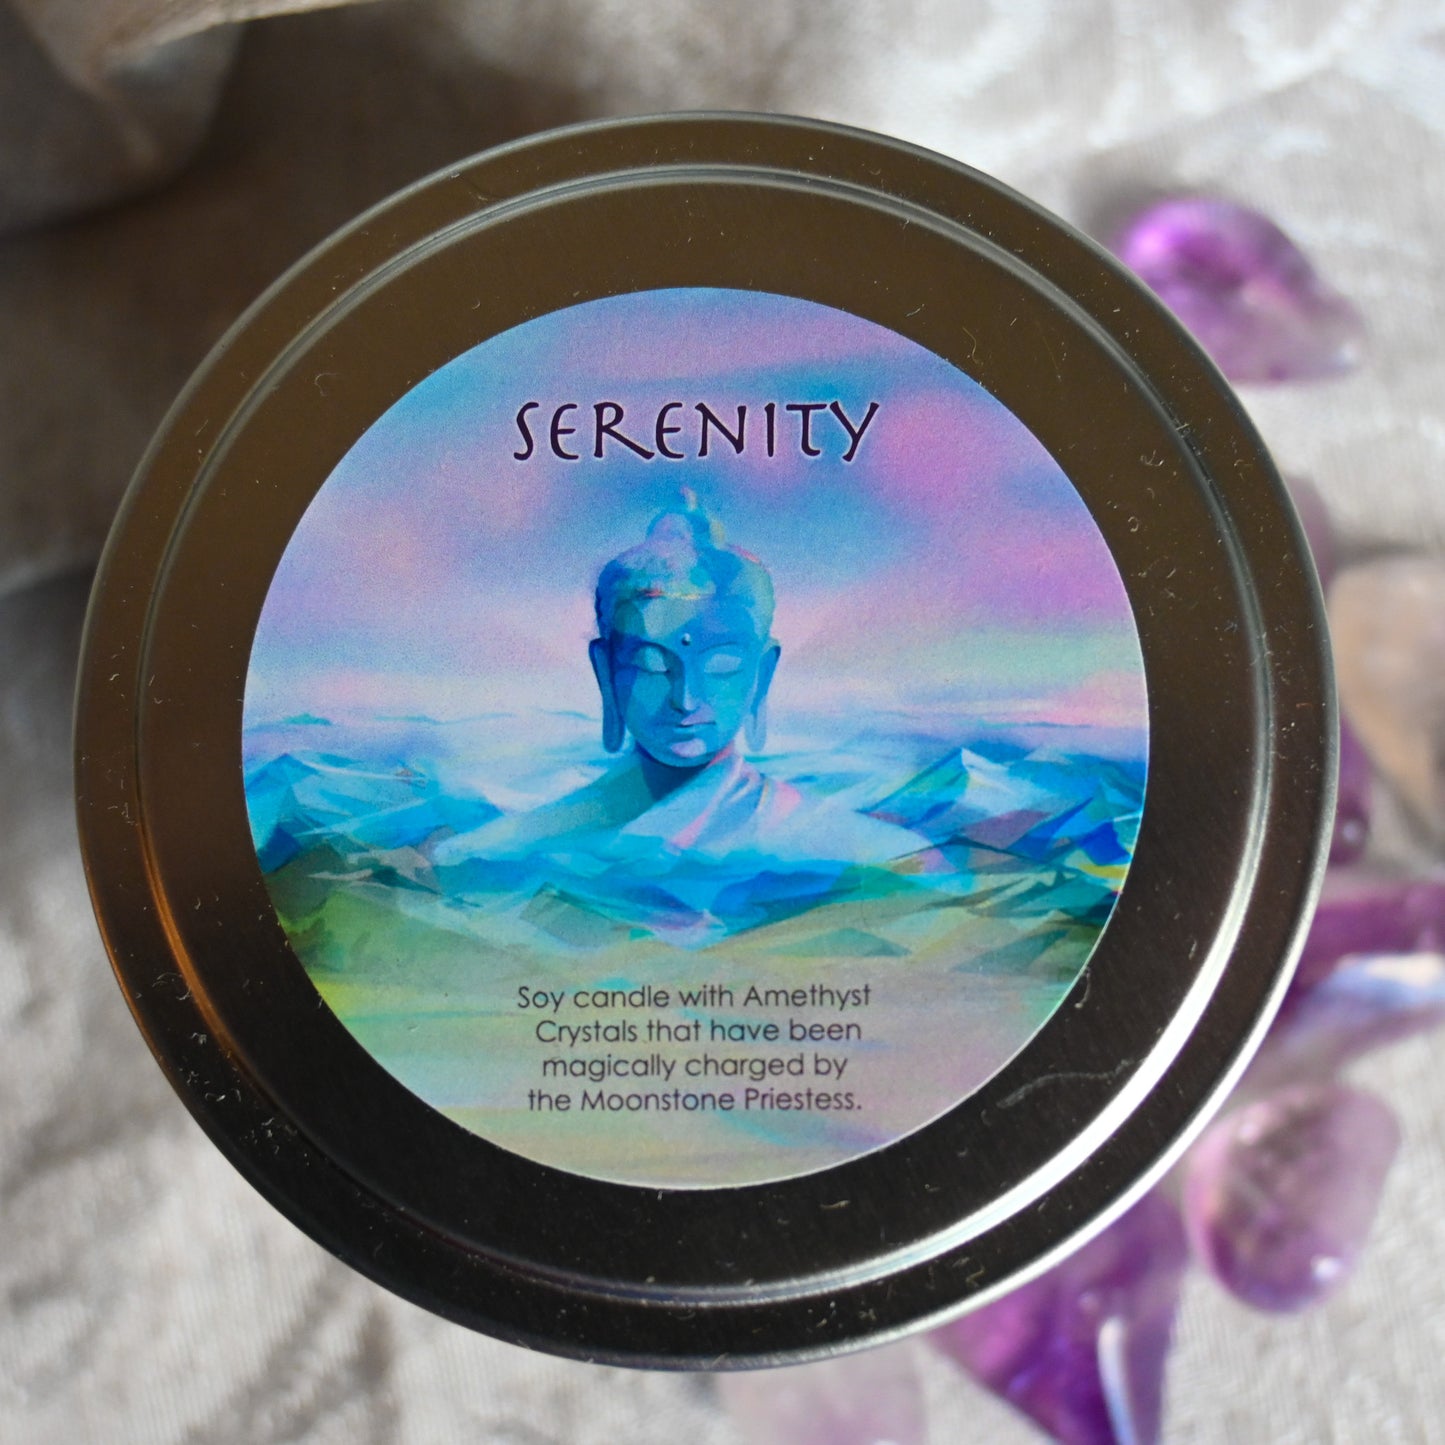 Serenity Magical Candle with Amethyst Crystals Travel Tin